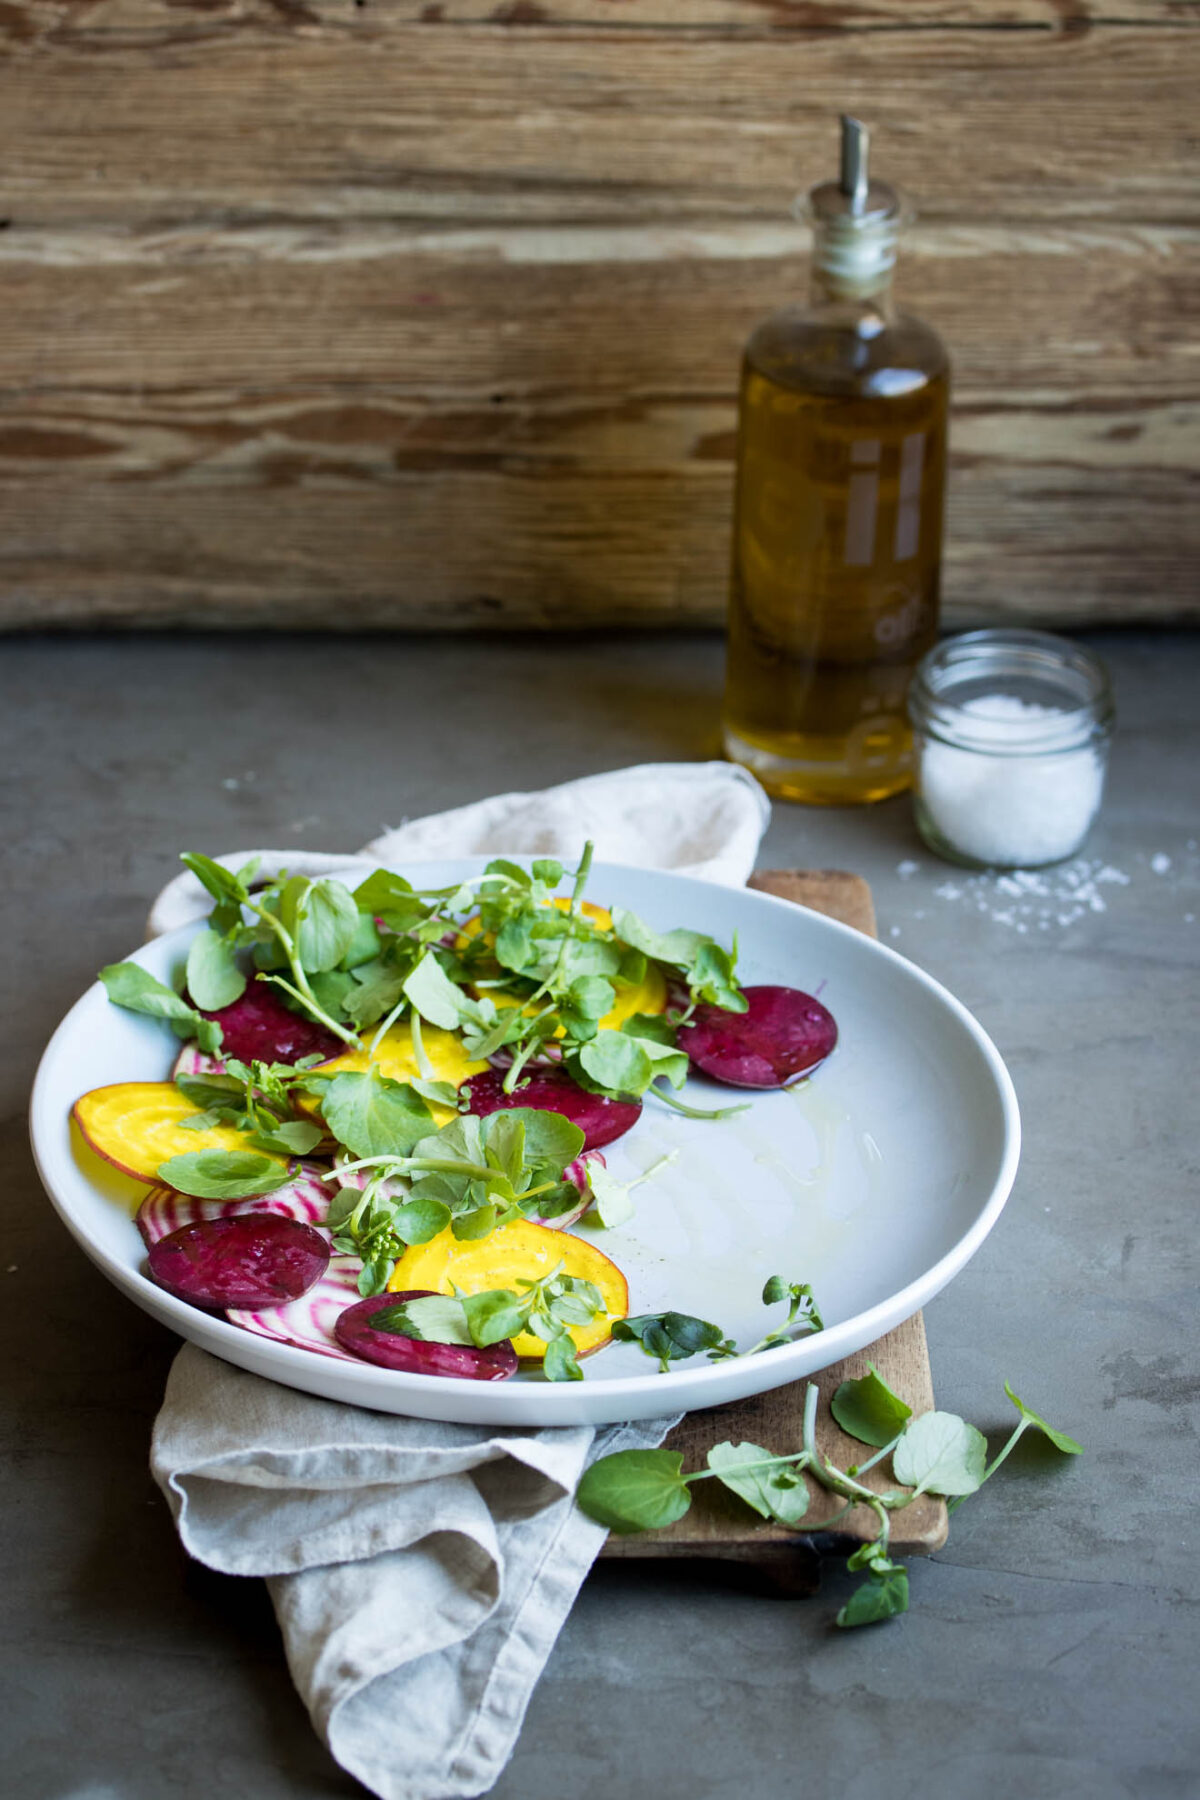 Vegan beet carpaccio, a simple summer dish that let's these beautiful ingredients shine.